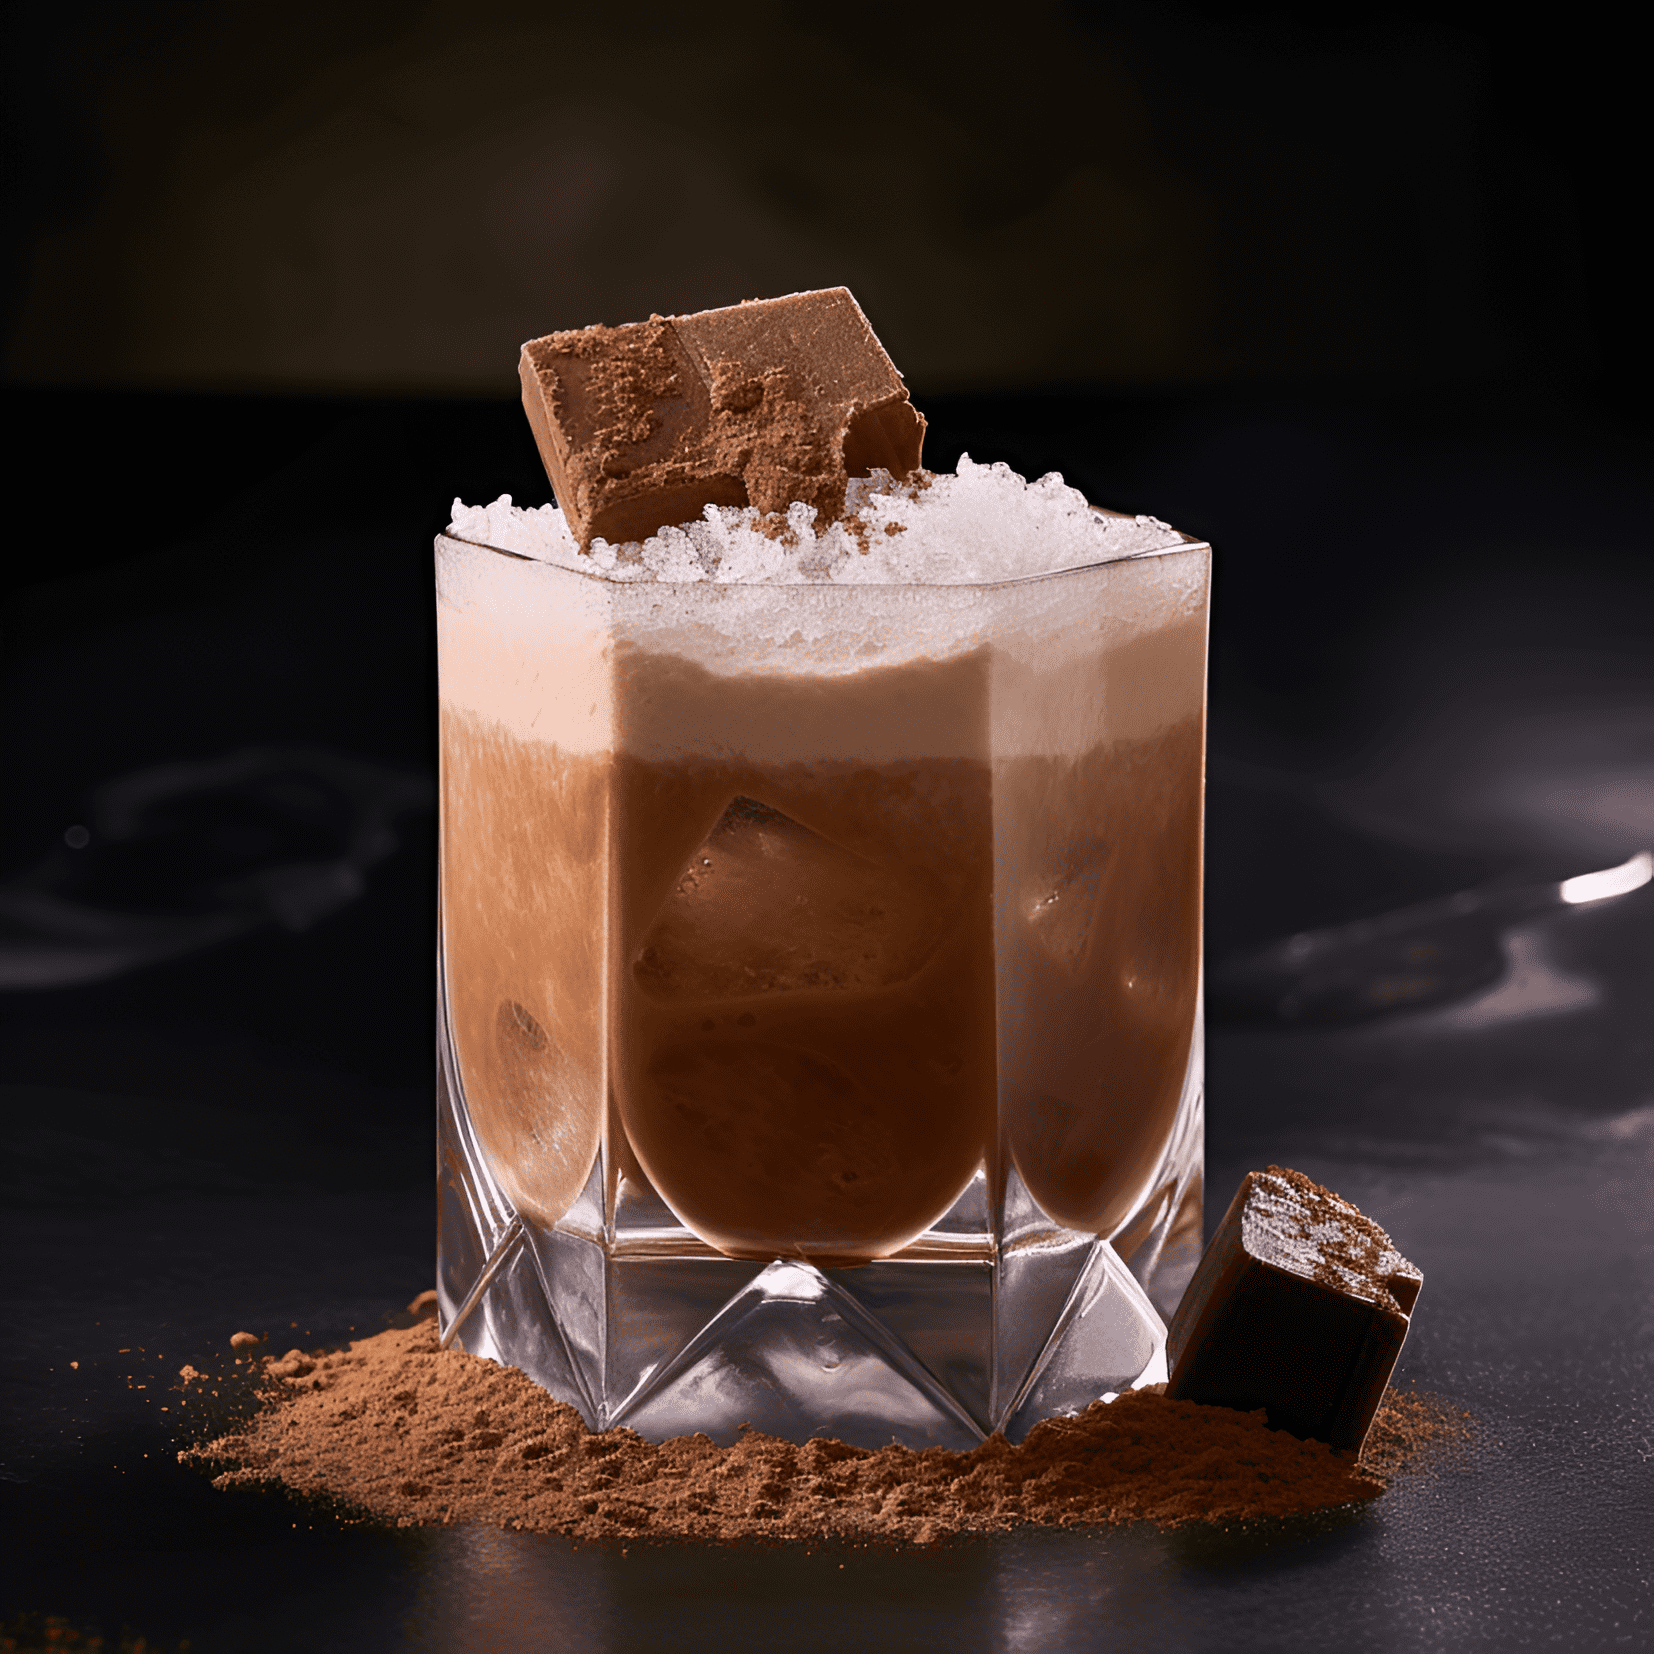 Brown Cow Cocktail Recipe - The Brown Cow cocktail offers a rich, creamy, and sweet flavor profile. It has a velvety texture with hints of chocolate and coffee, making it a delightful treat for the taste buds. The drink is well-balanced, with the sweetness of the chocolate liqueur complemented by the subtle bitterness of the coffee liqueur.